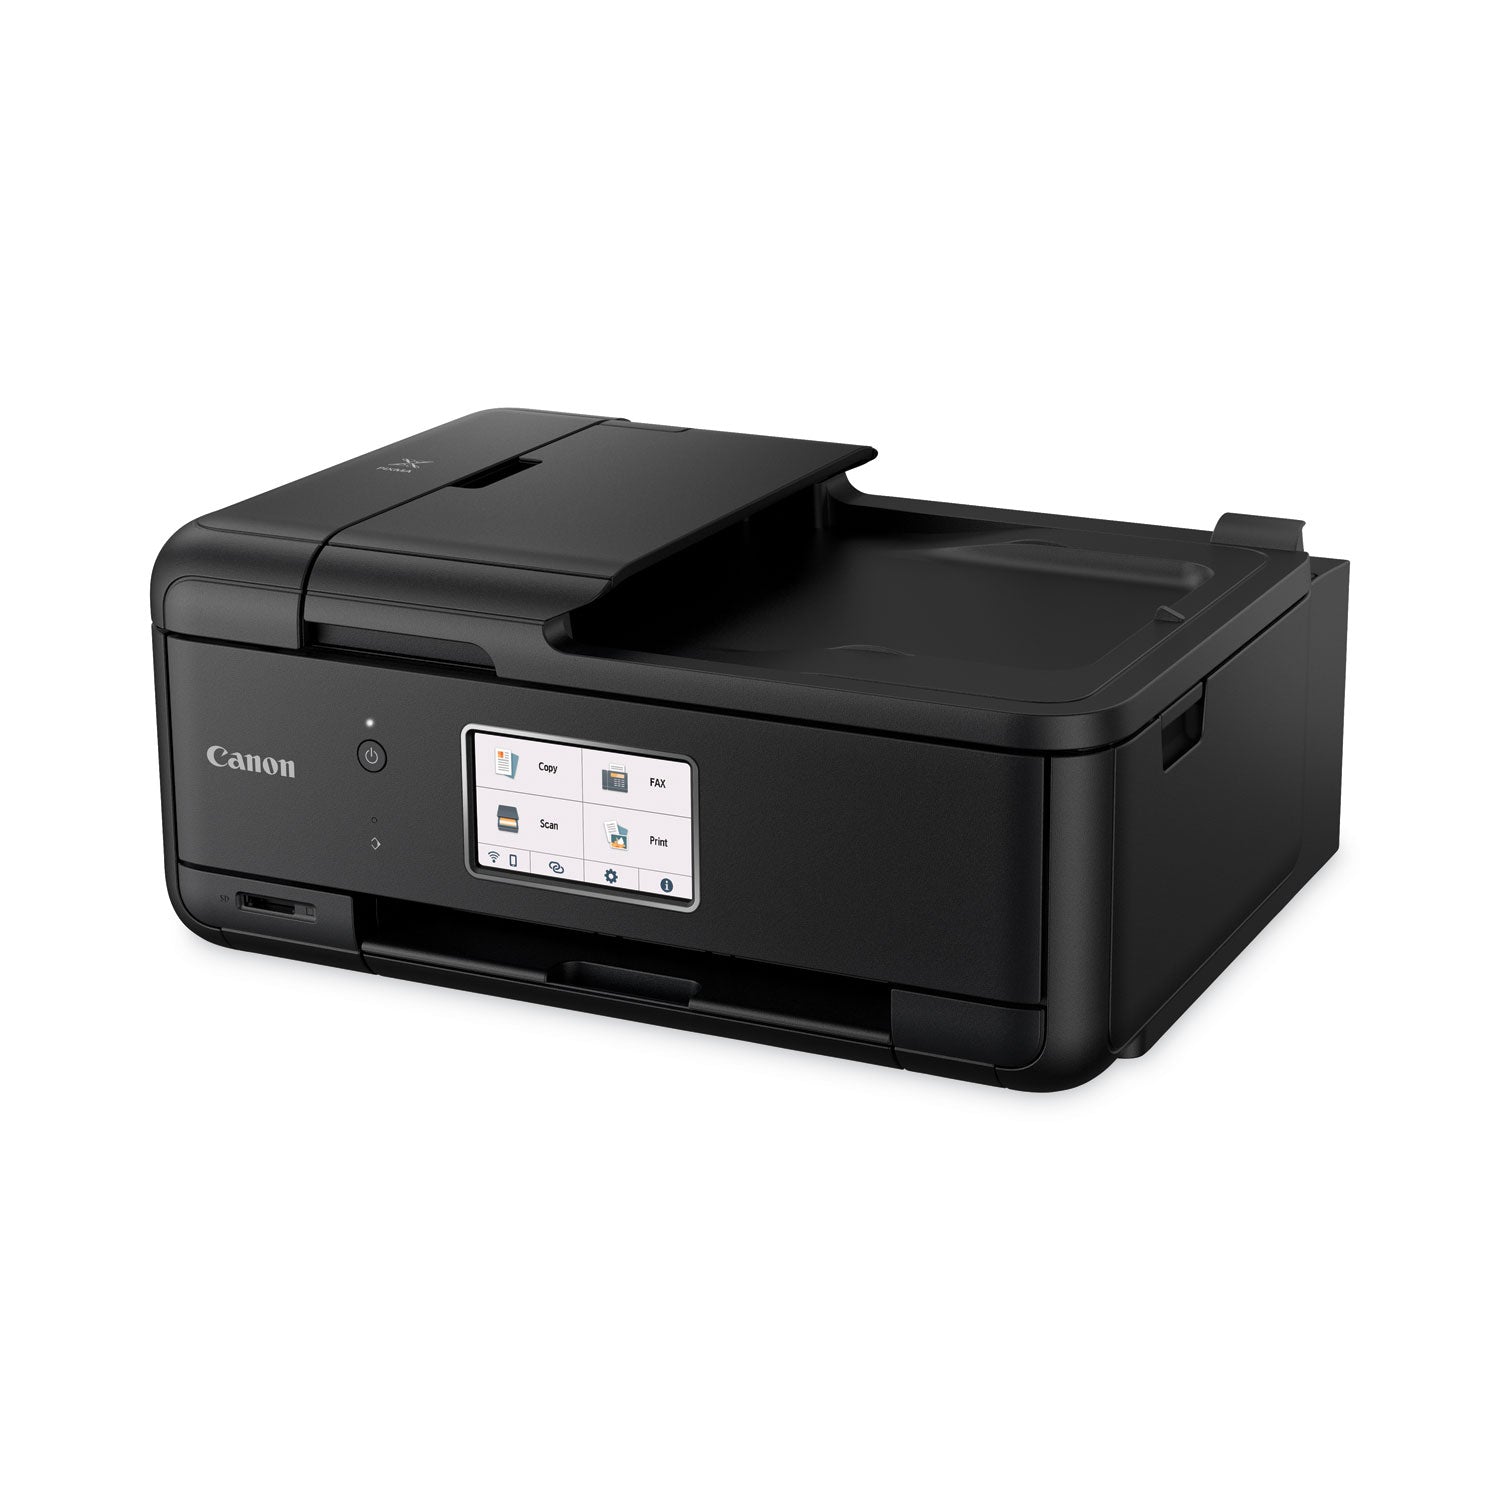 pixma-tr8620a-all-in-one-inkjet-printer-copy-fax-print-scan_cnm4451c032 - 3